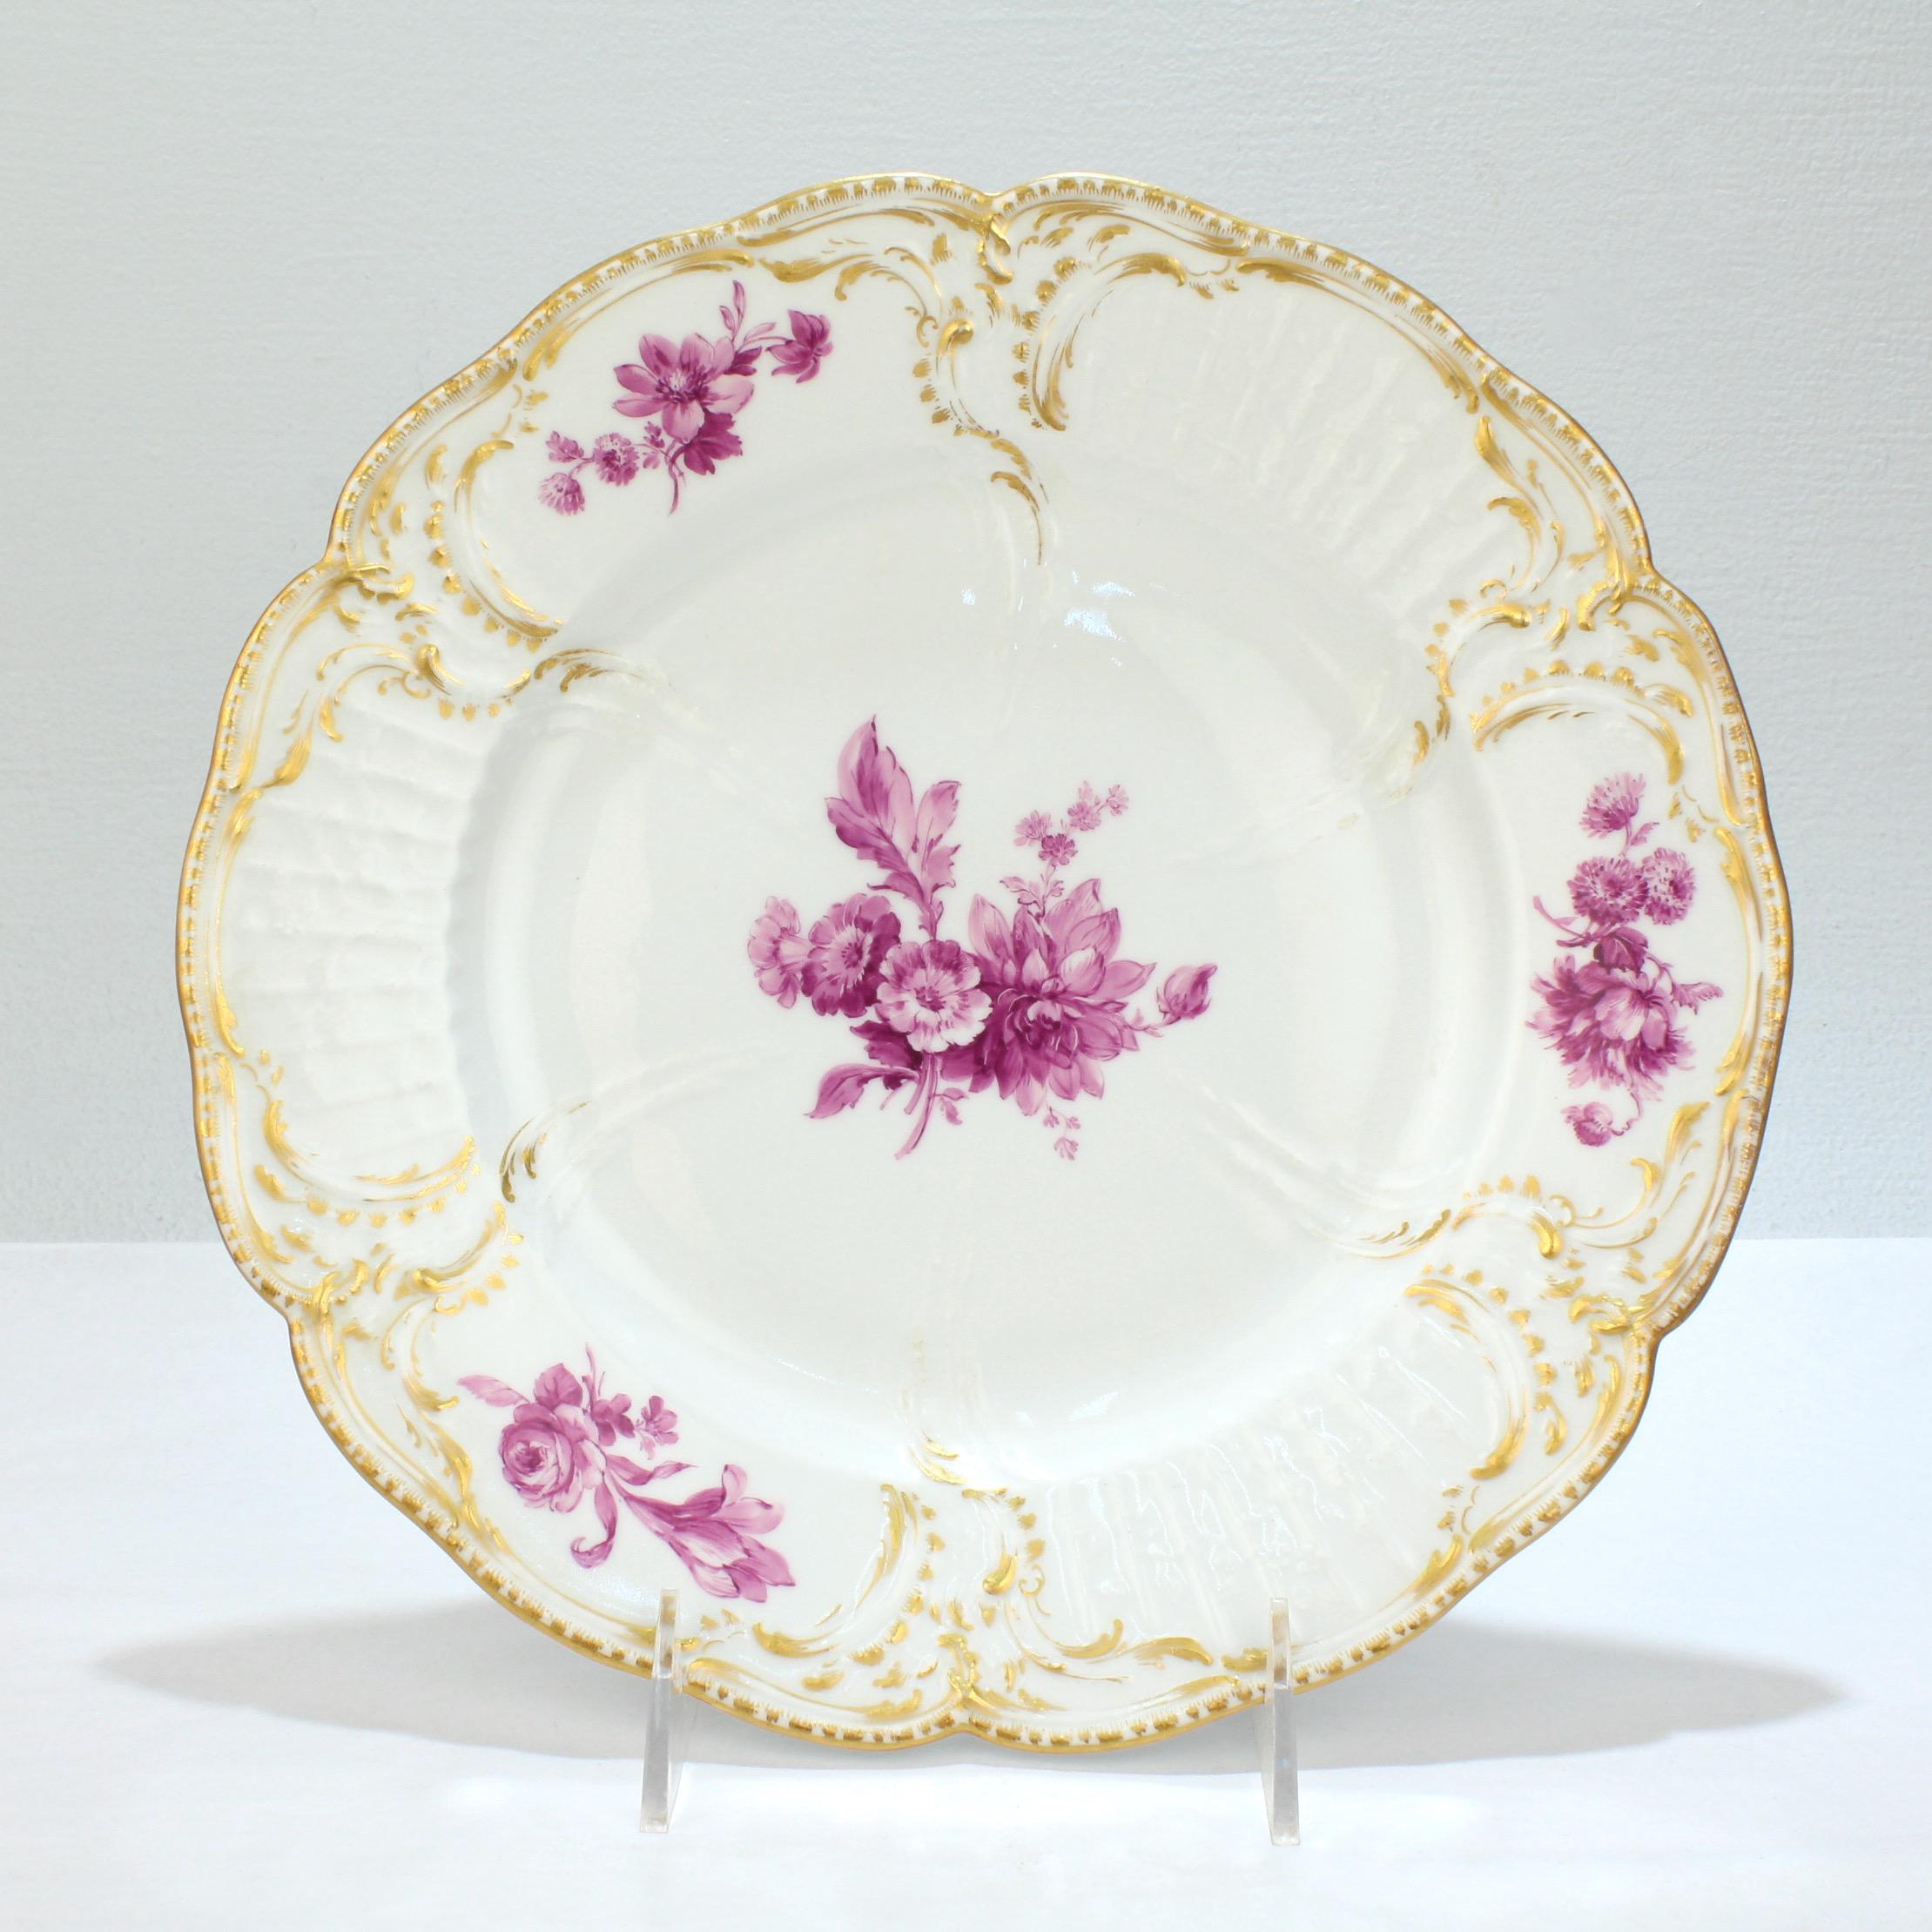 Rococo Set of 12 Antique KPM Royal Berlin Porcelain Reliefzierat Dinner Plates in Puce